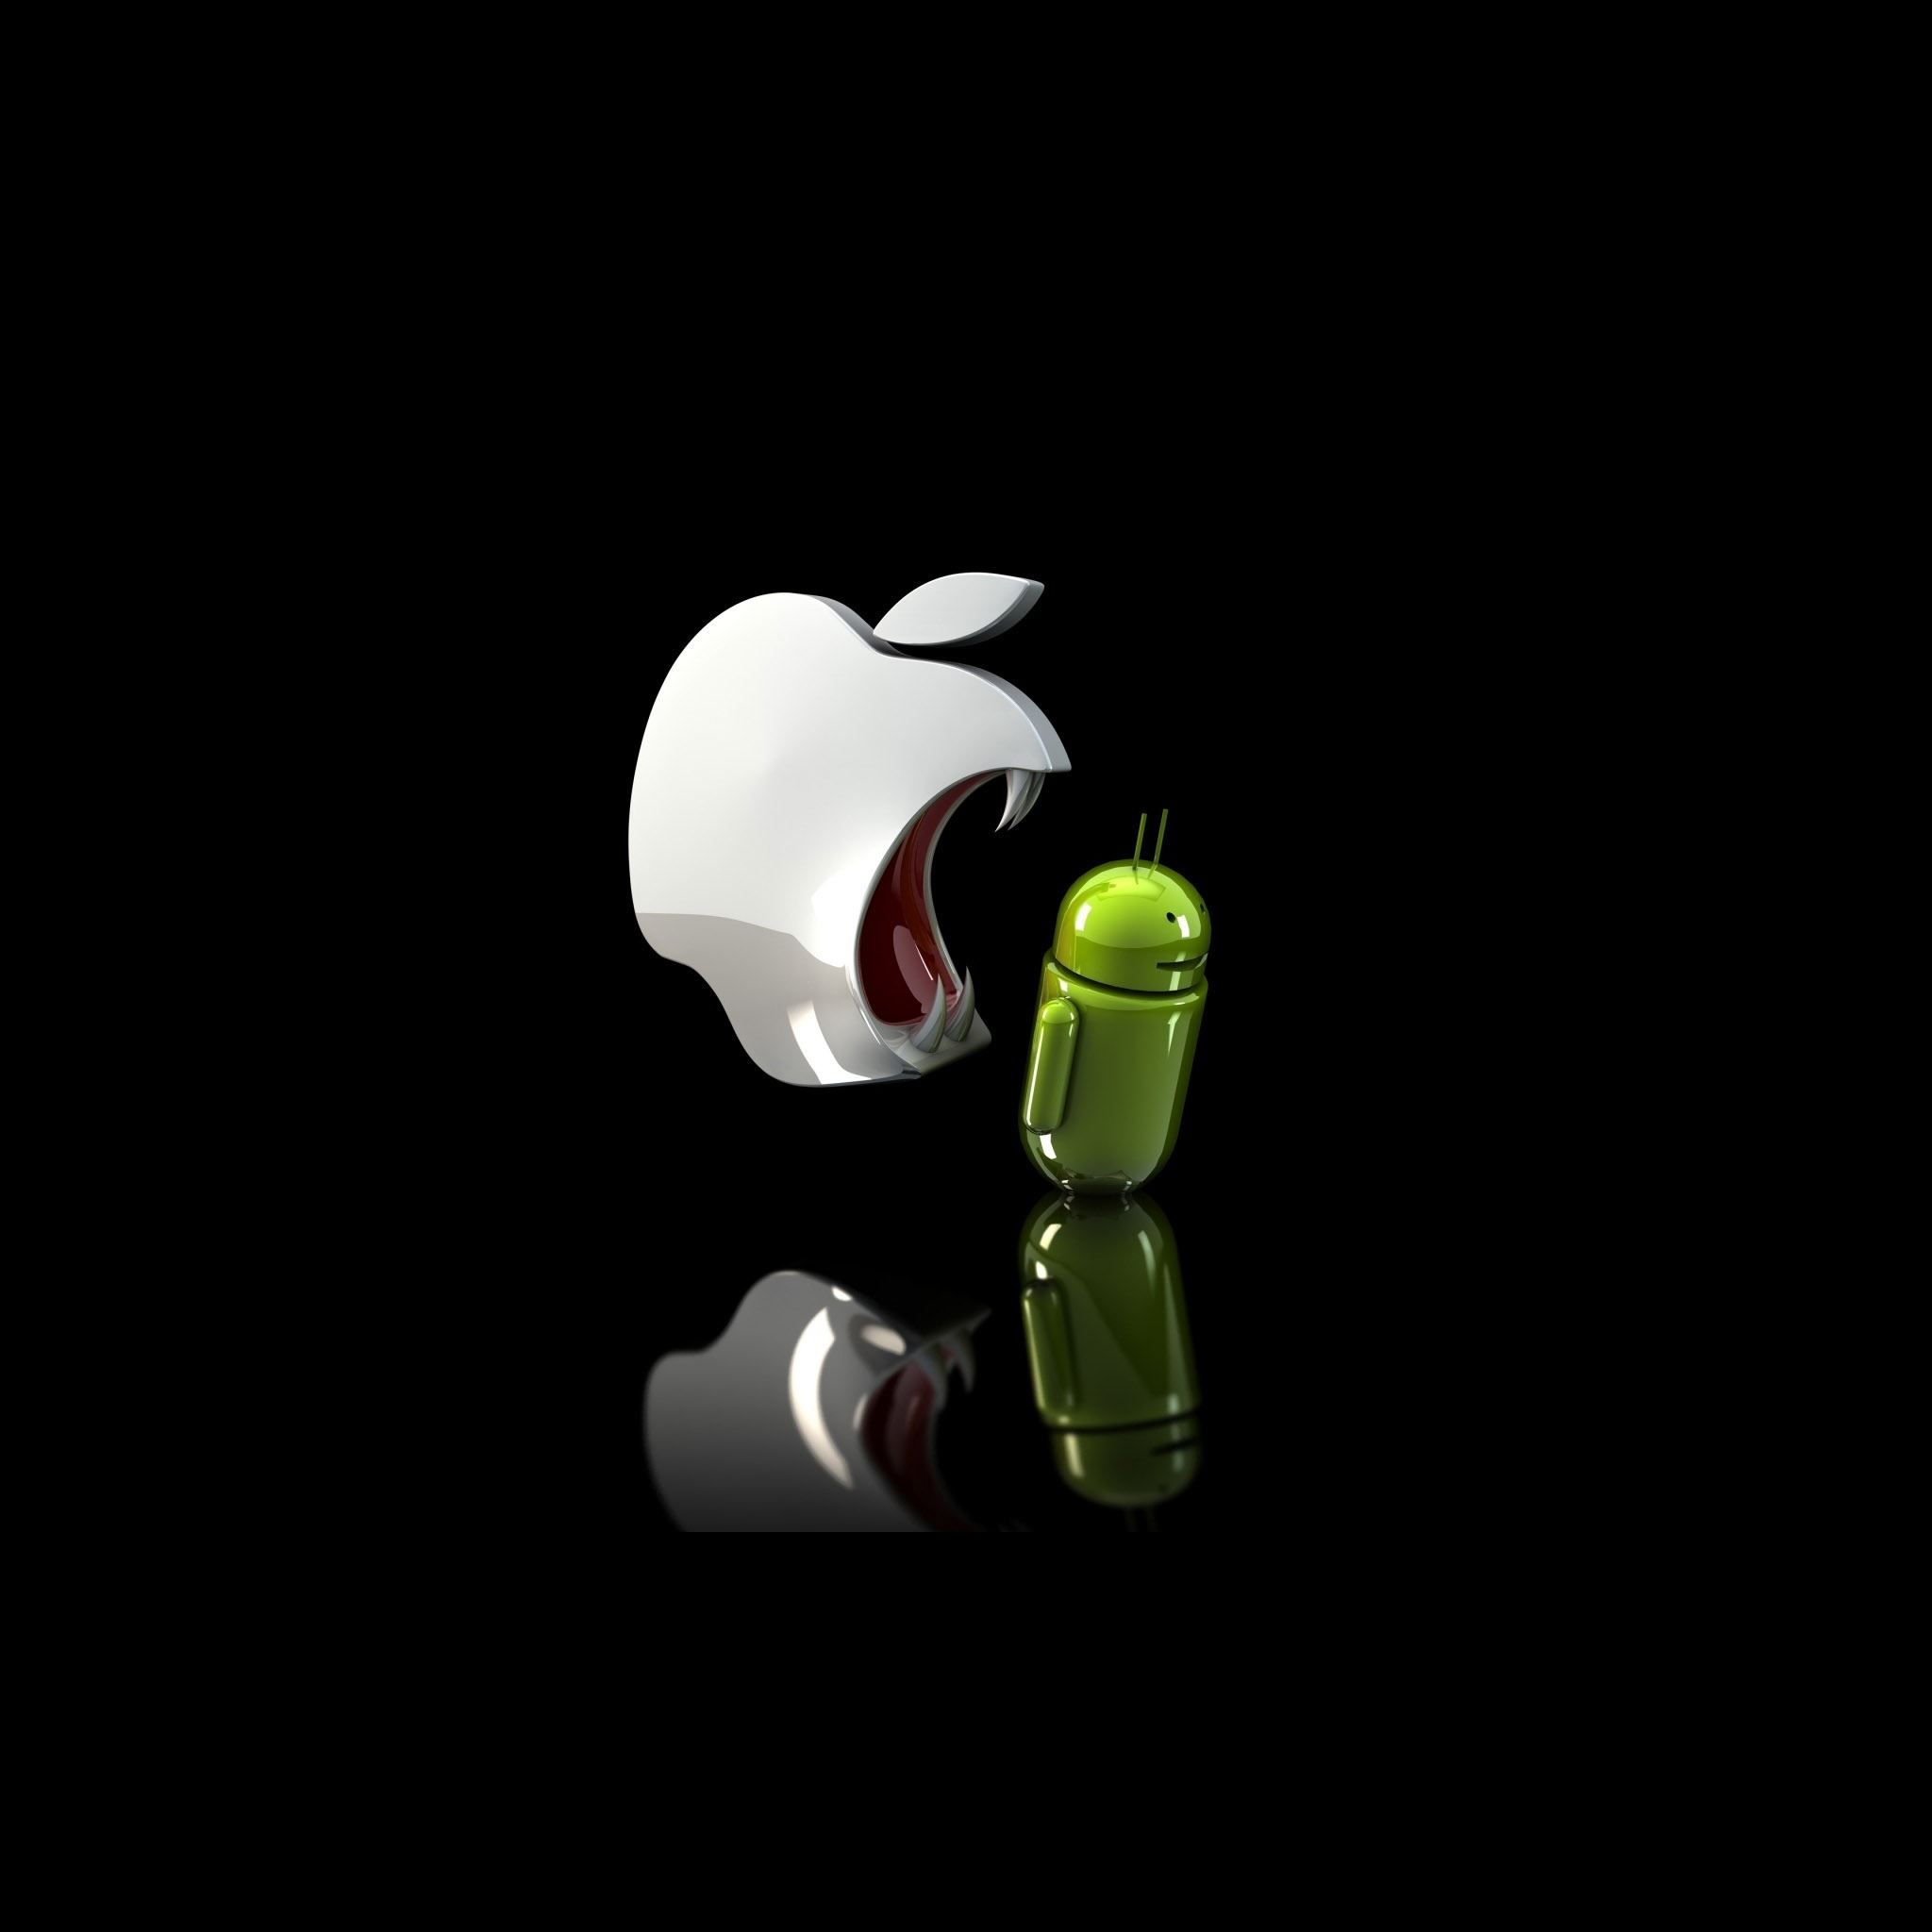 Apple Ready To Eat Android iPad Air wallpaper 